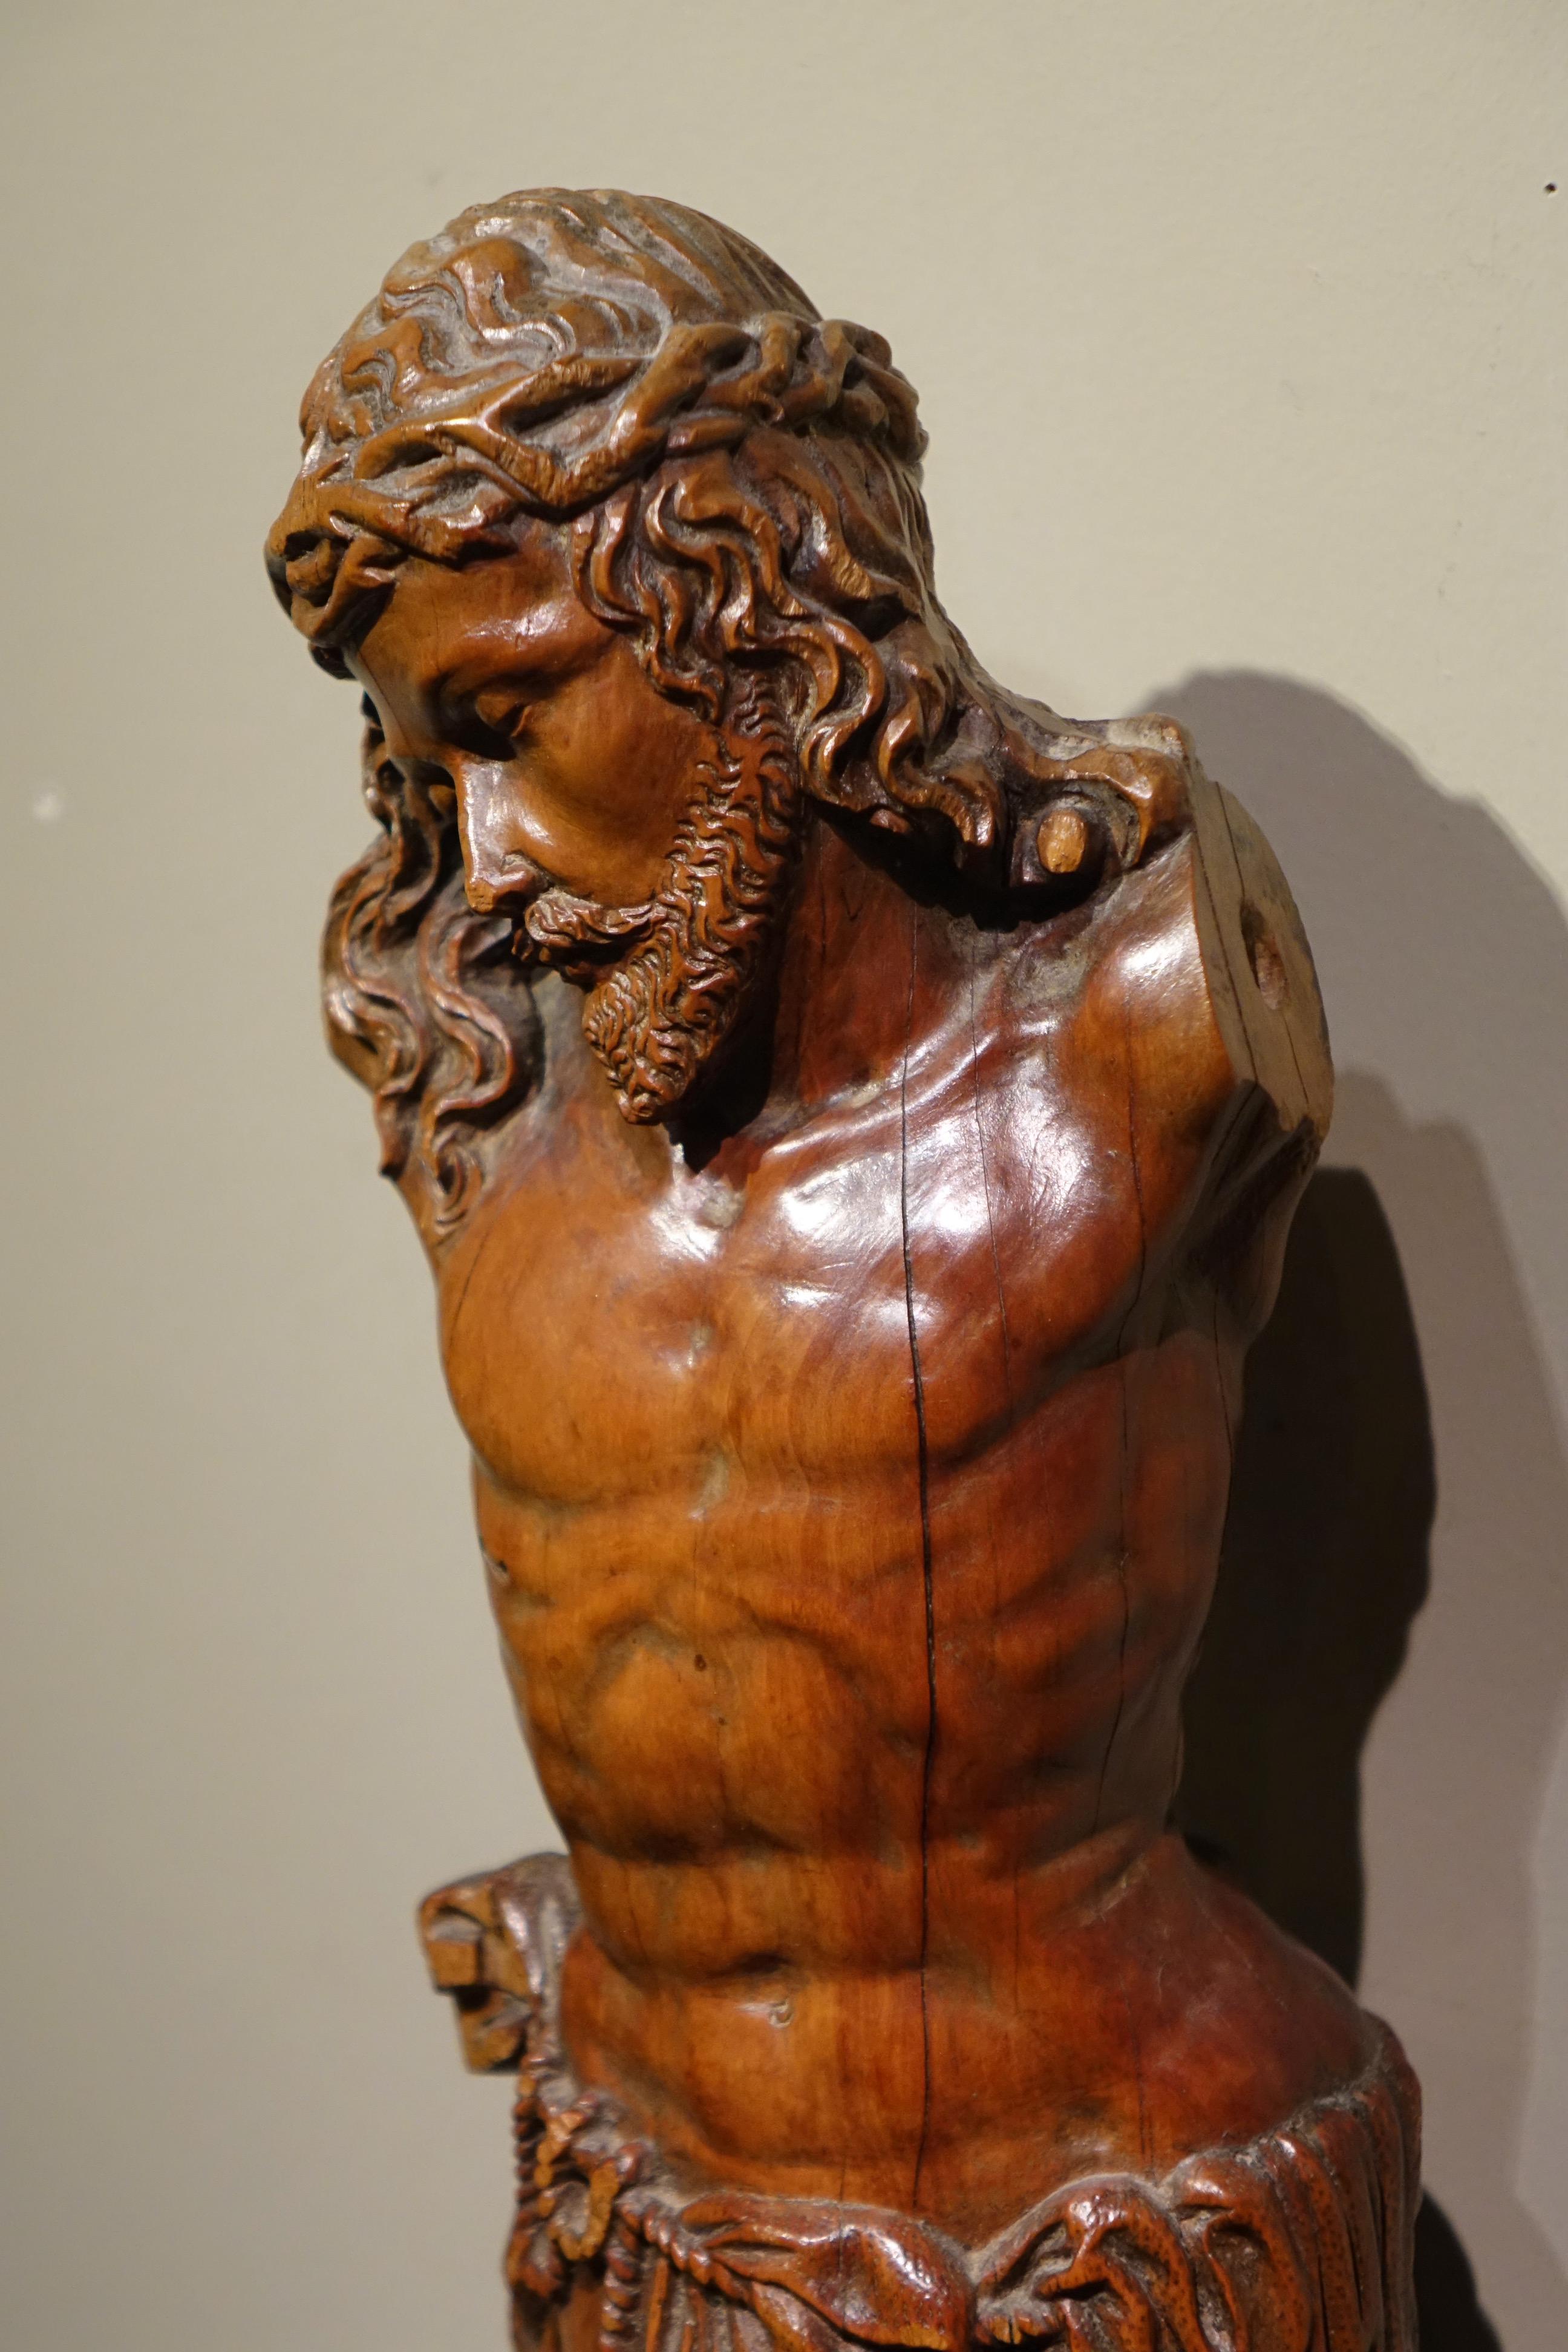 Christ in Boxwood, France, late 16th-early 17th century